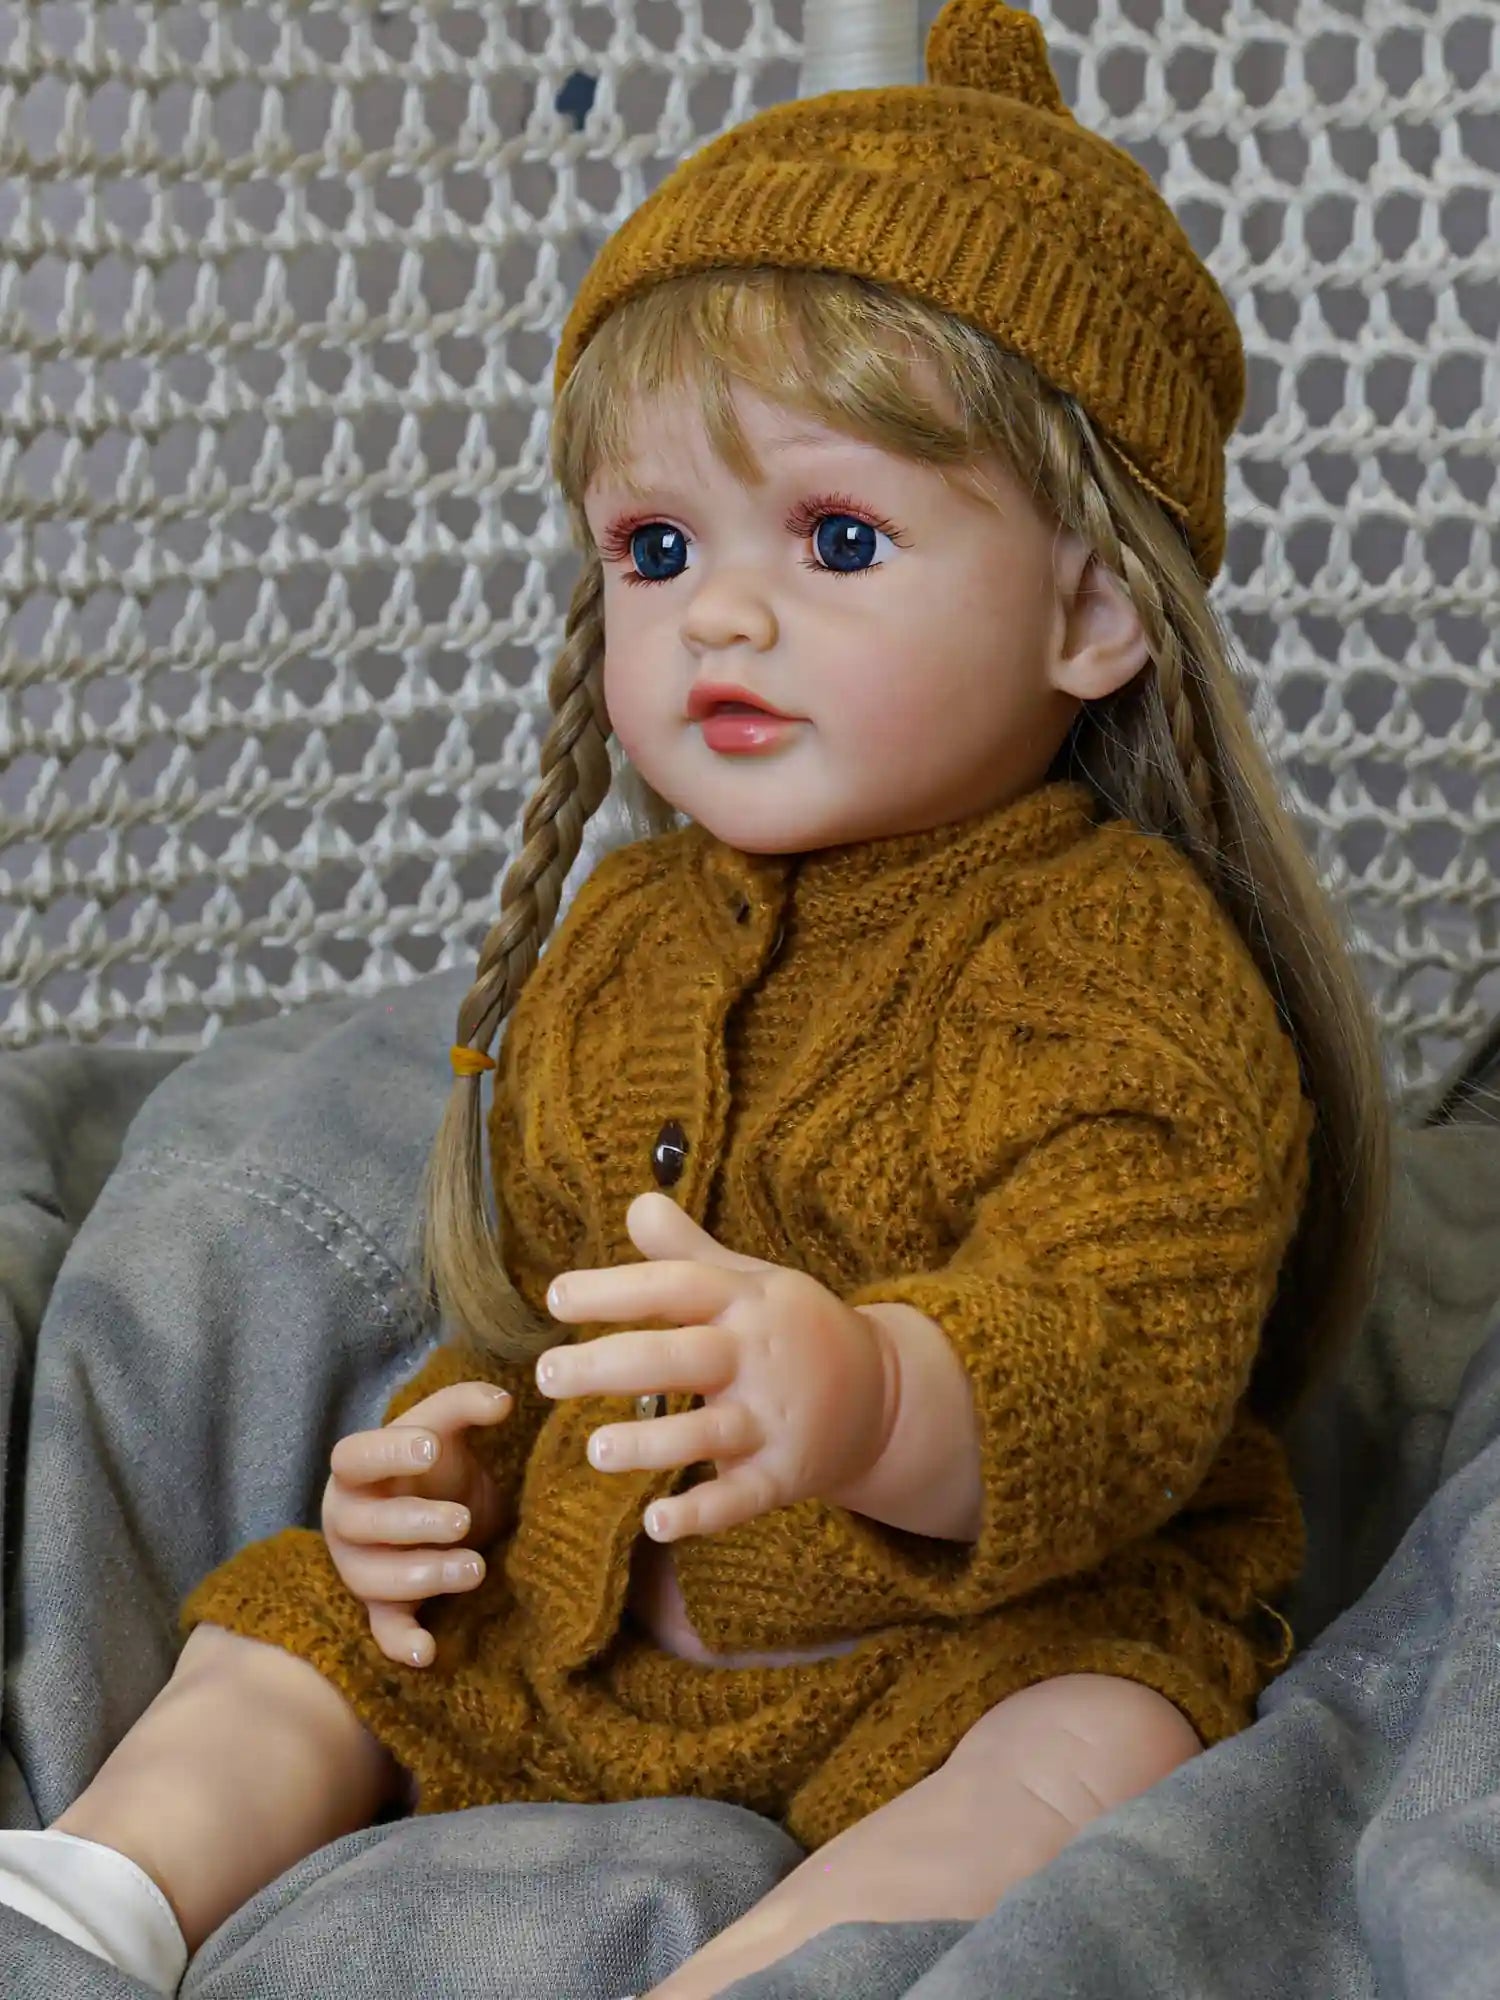 A doll capturing the innocence of a toddler, with braided blonde hair and blue eyes, cozy in a textured mustard knitwear set against a soft grey surface.